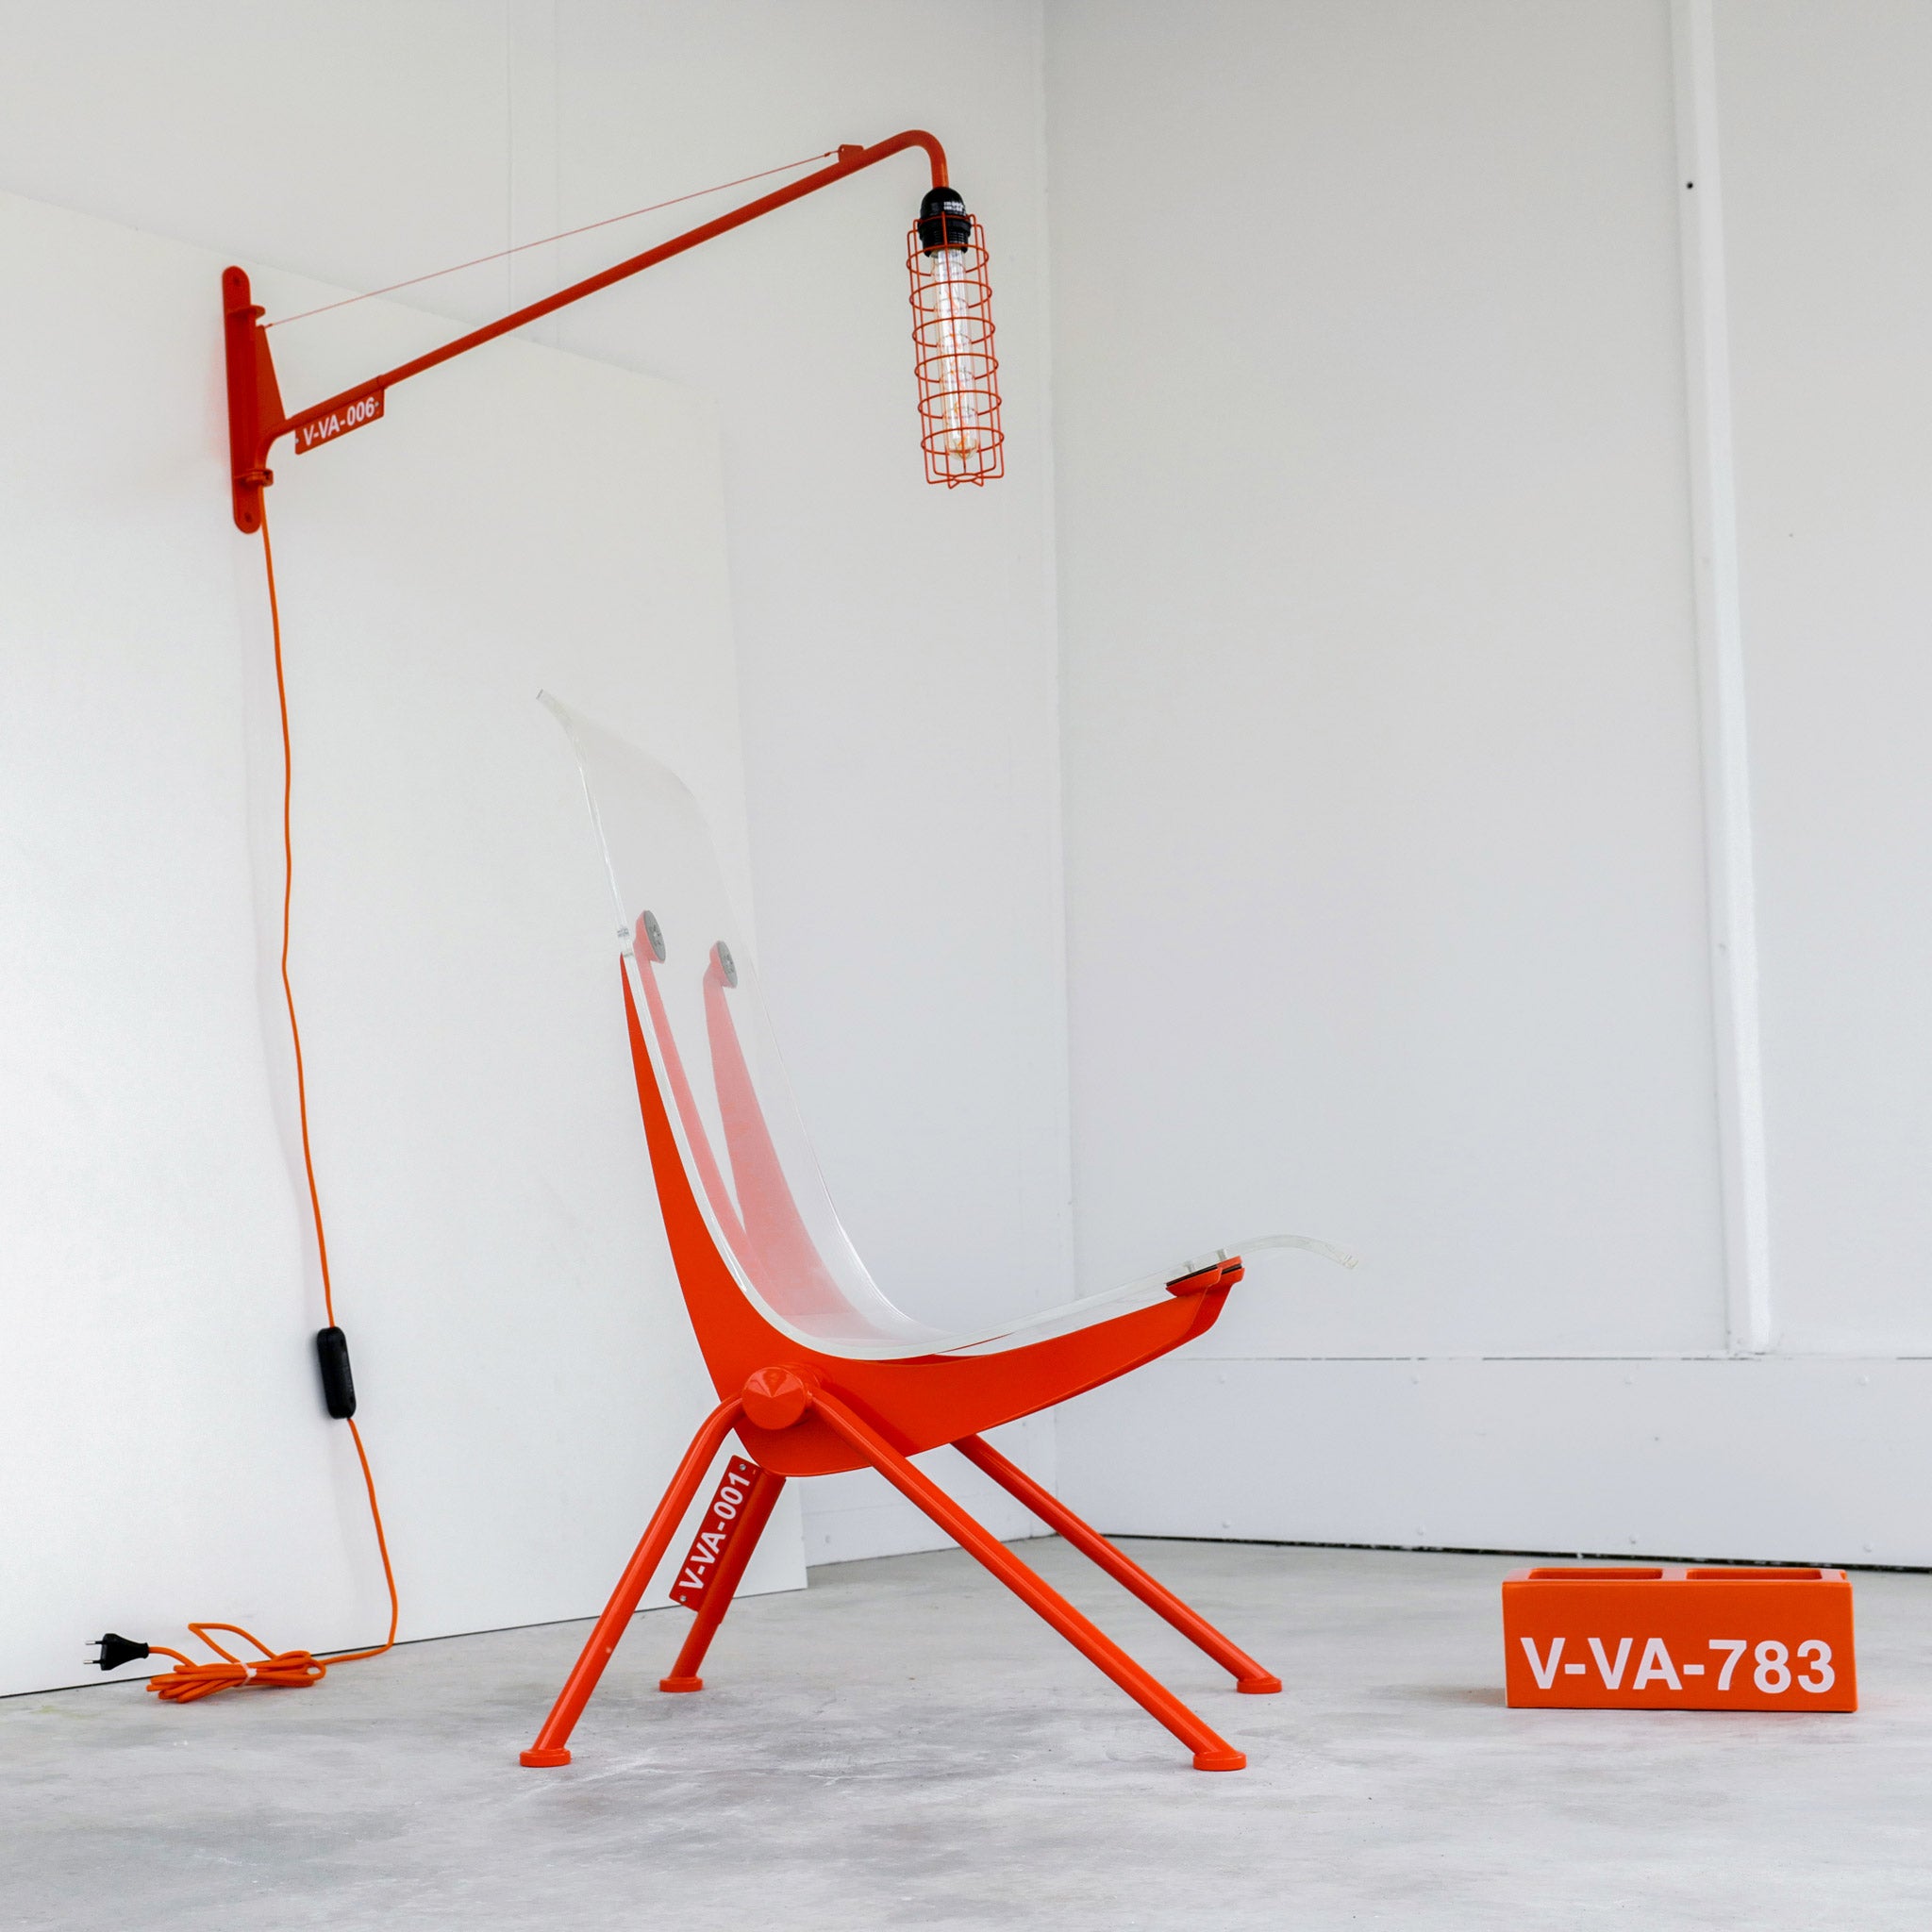 Vitra - Virgil Abloh pays tribute to the iconic design of Jean Prouvé's  Antony Chair with an updated version in his installation TWENTYTHIRTYFIVE.  He has transformed the armchair by giving it a